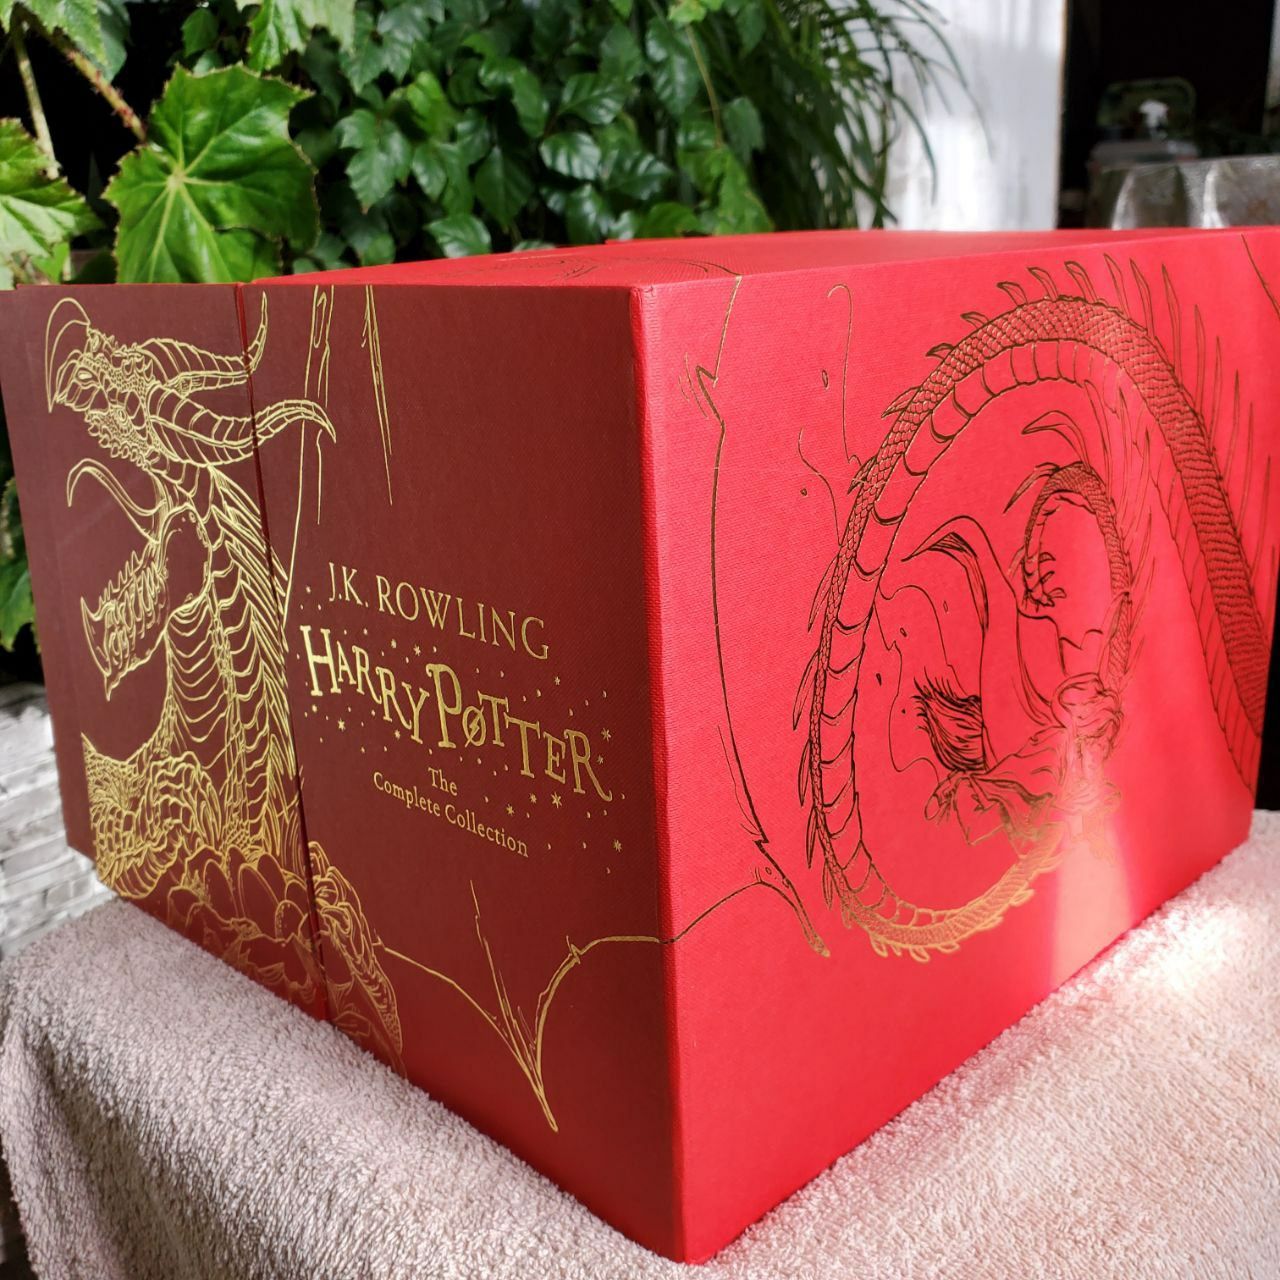 Harry Potter Box Set: The Complete Collection (Children’s Hardback)